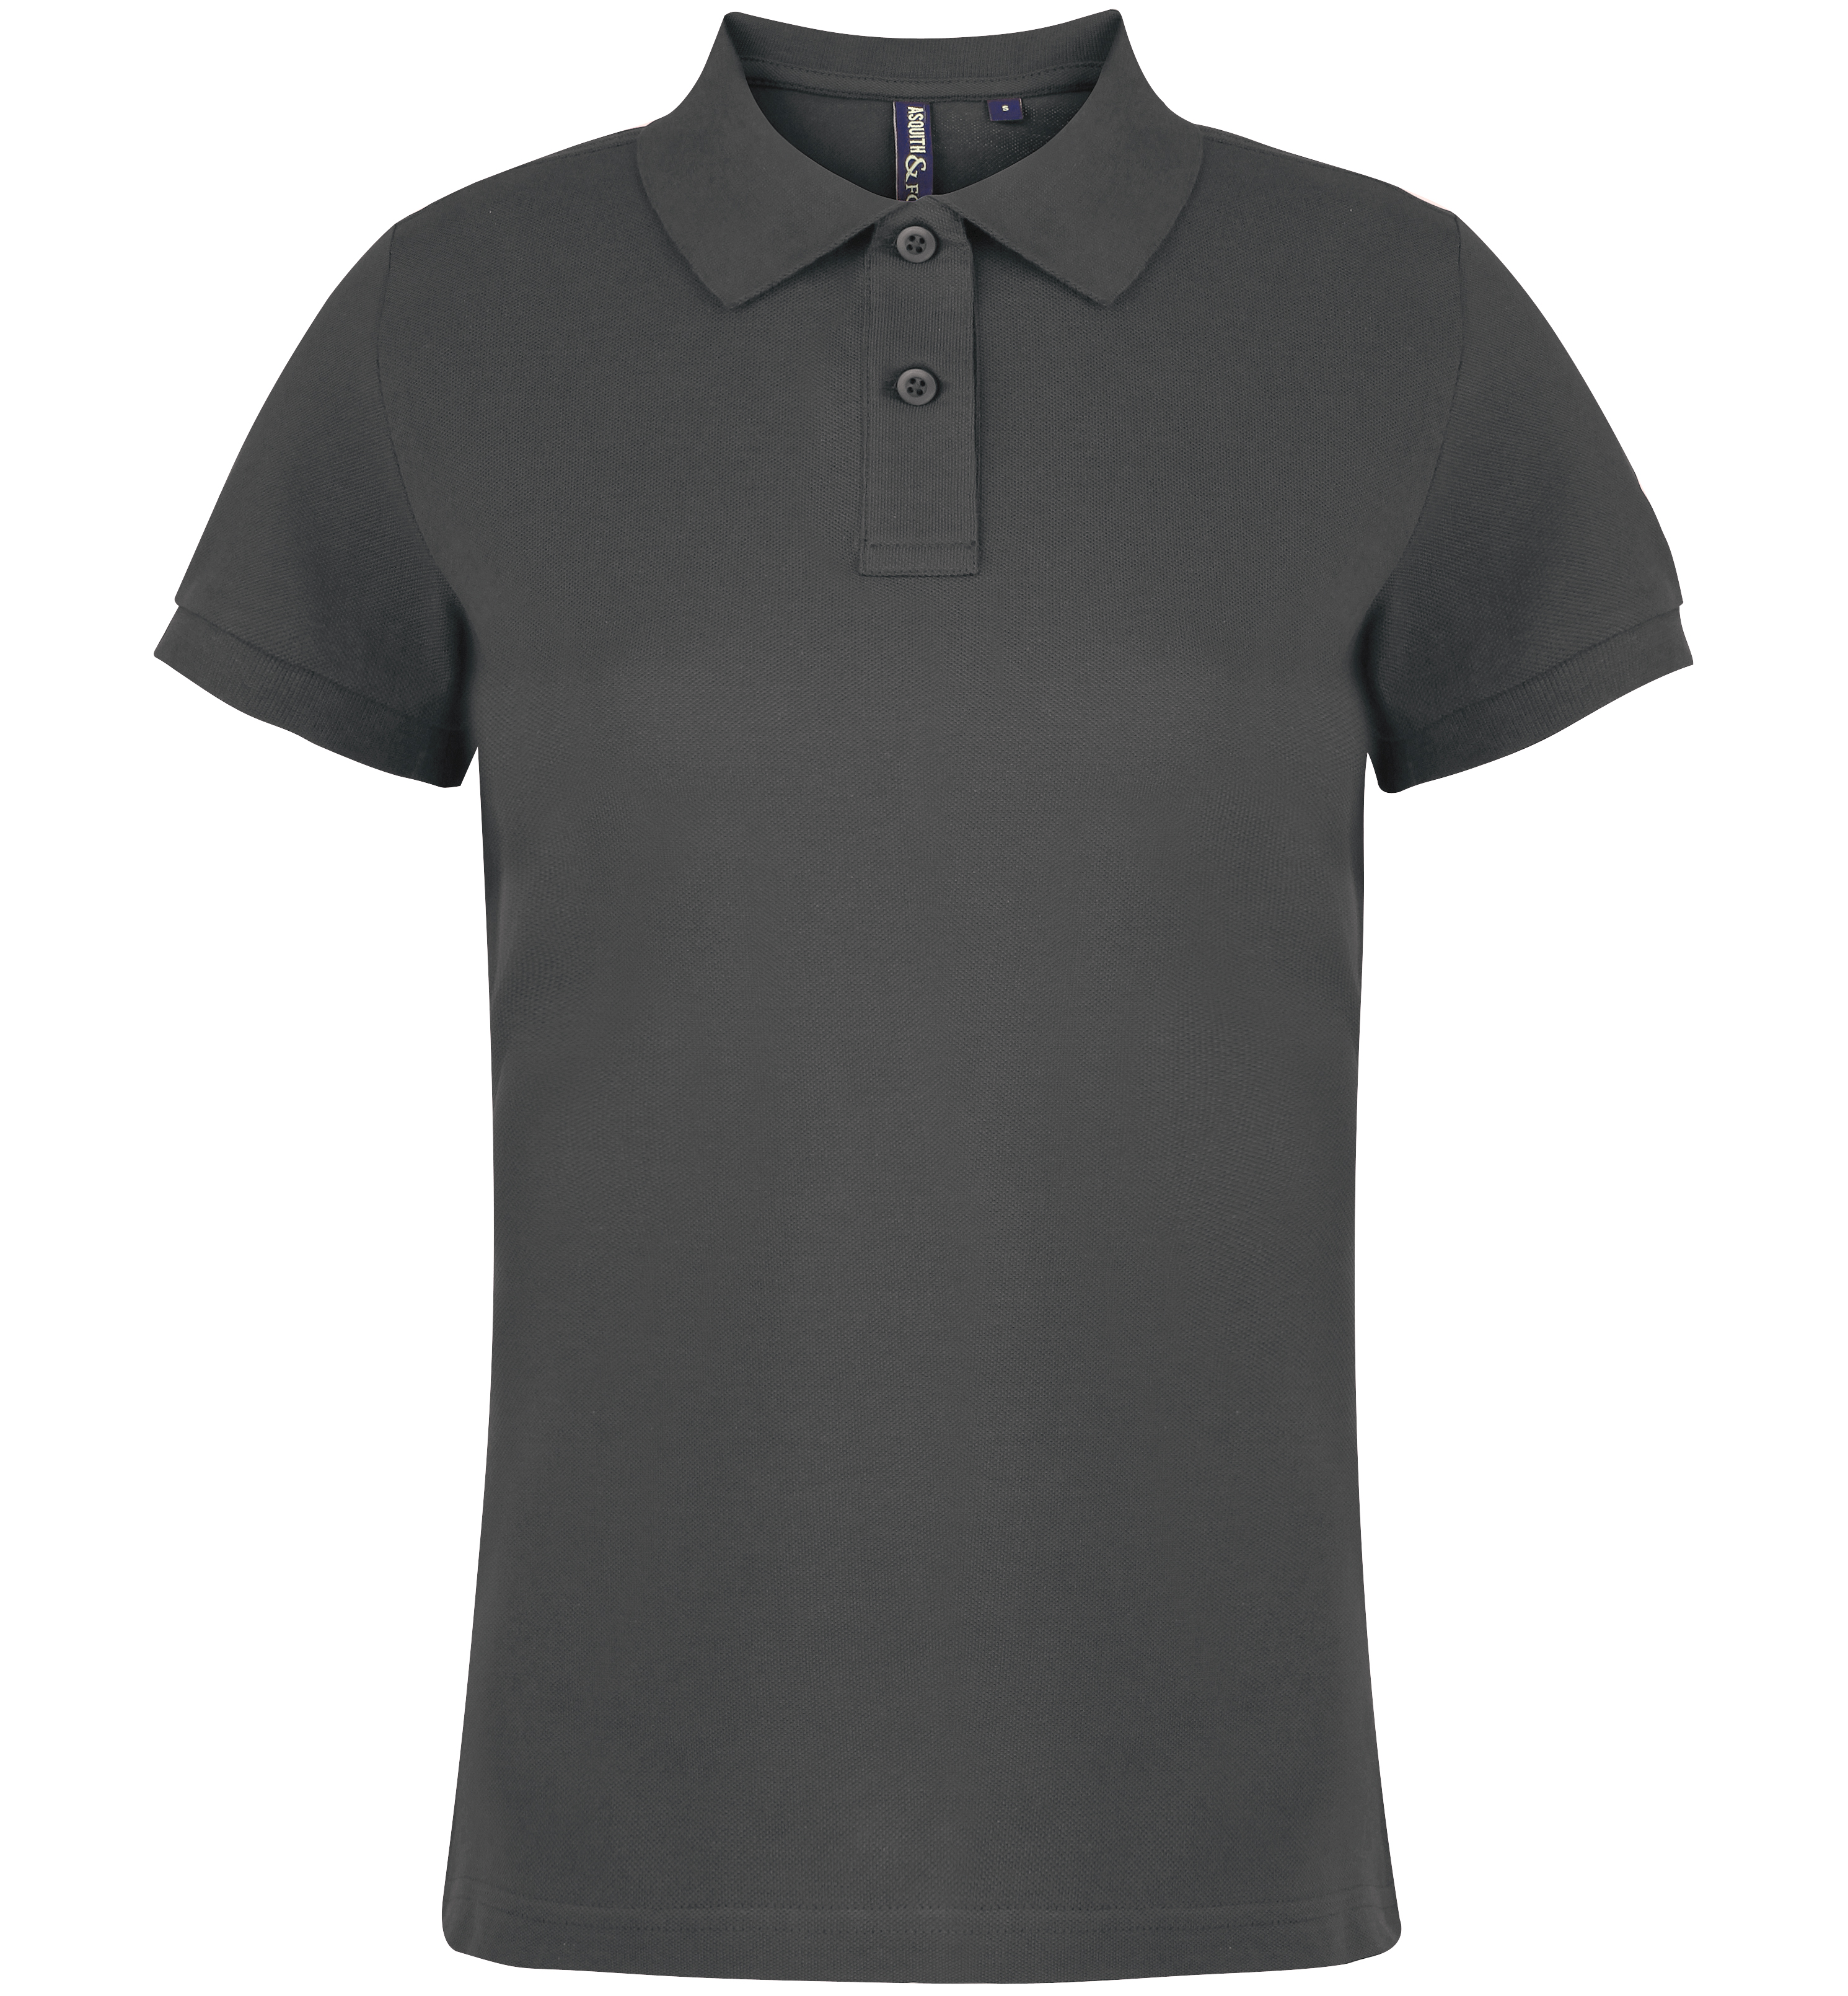 ax-httpswebsystems.s3.amazonaws.comtmp_for_downloadasquith-and-fox-womens-polo-charcoal.jpg